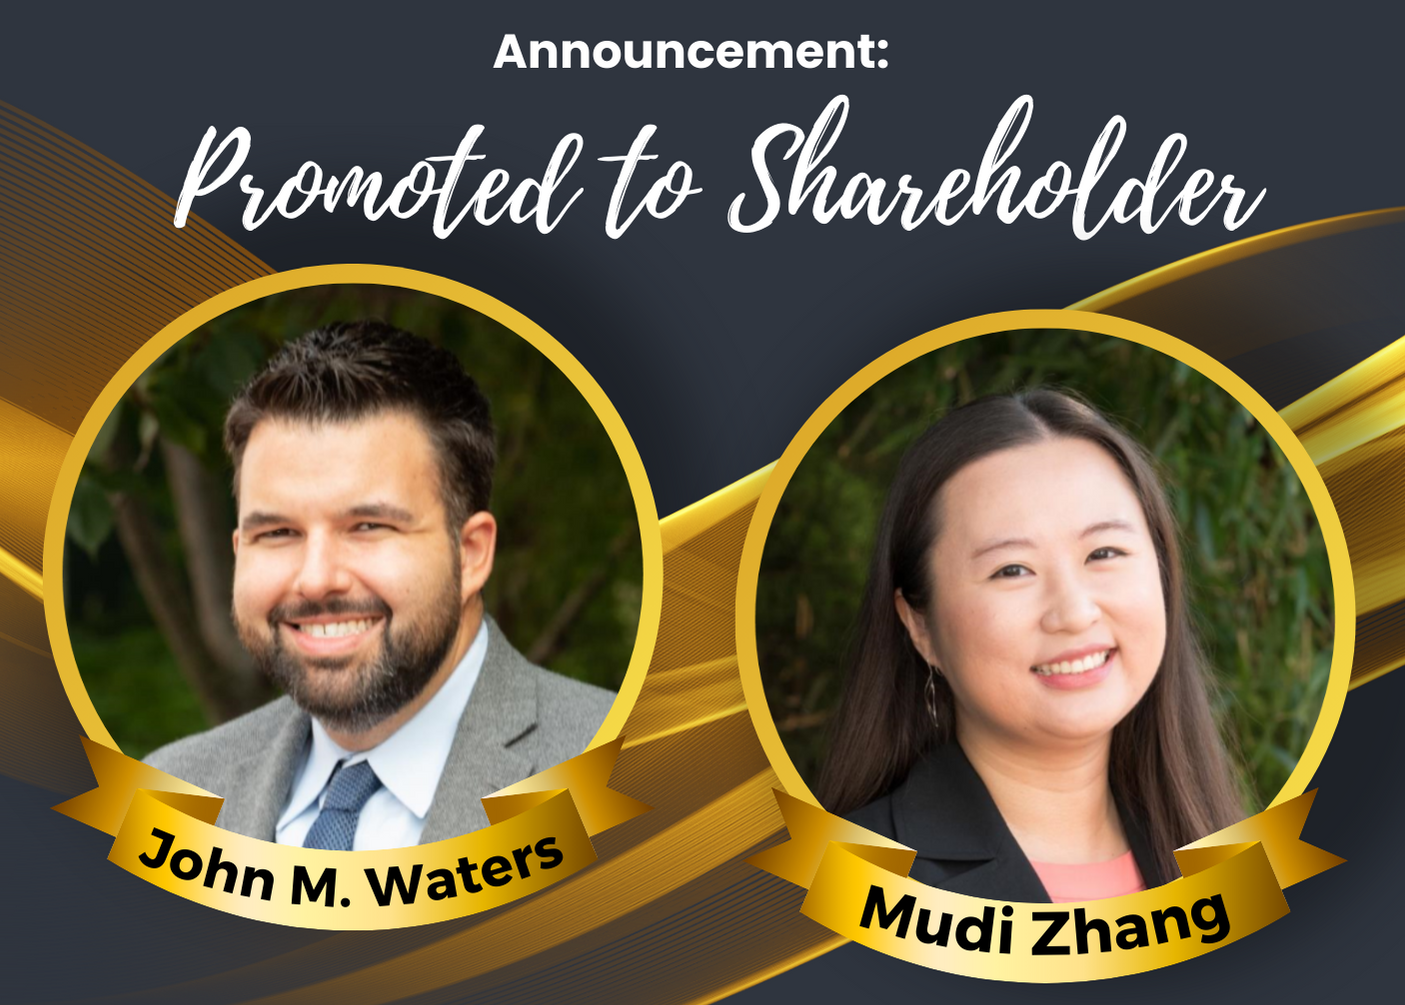 WEC Announces Promotion of John M. Waters and Mudi Zhang to Shareholder Image